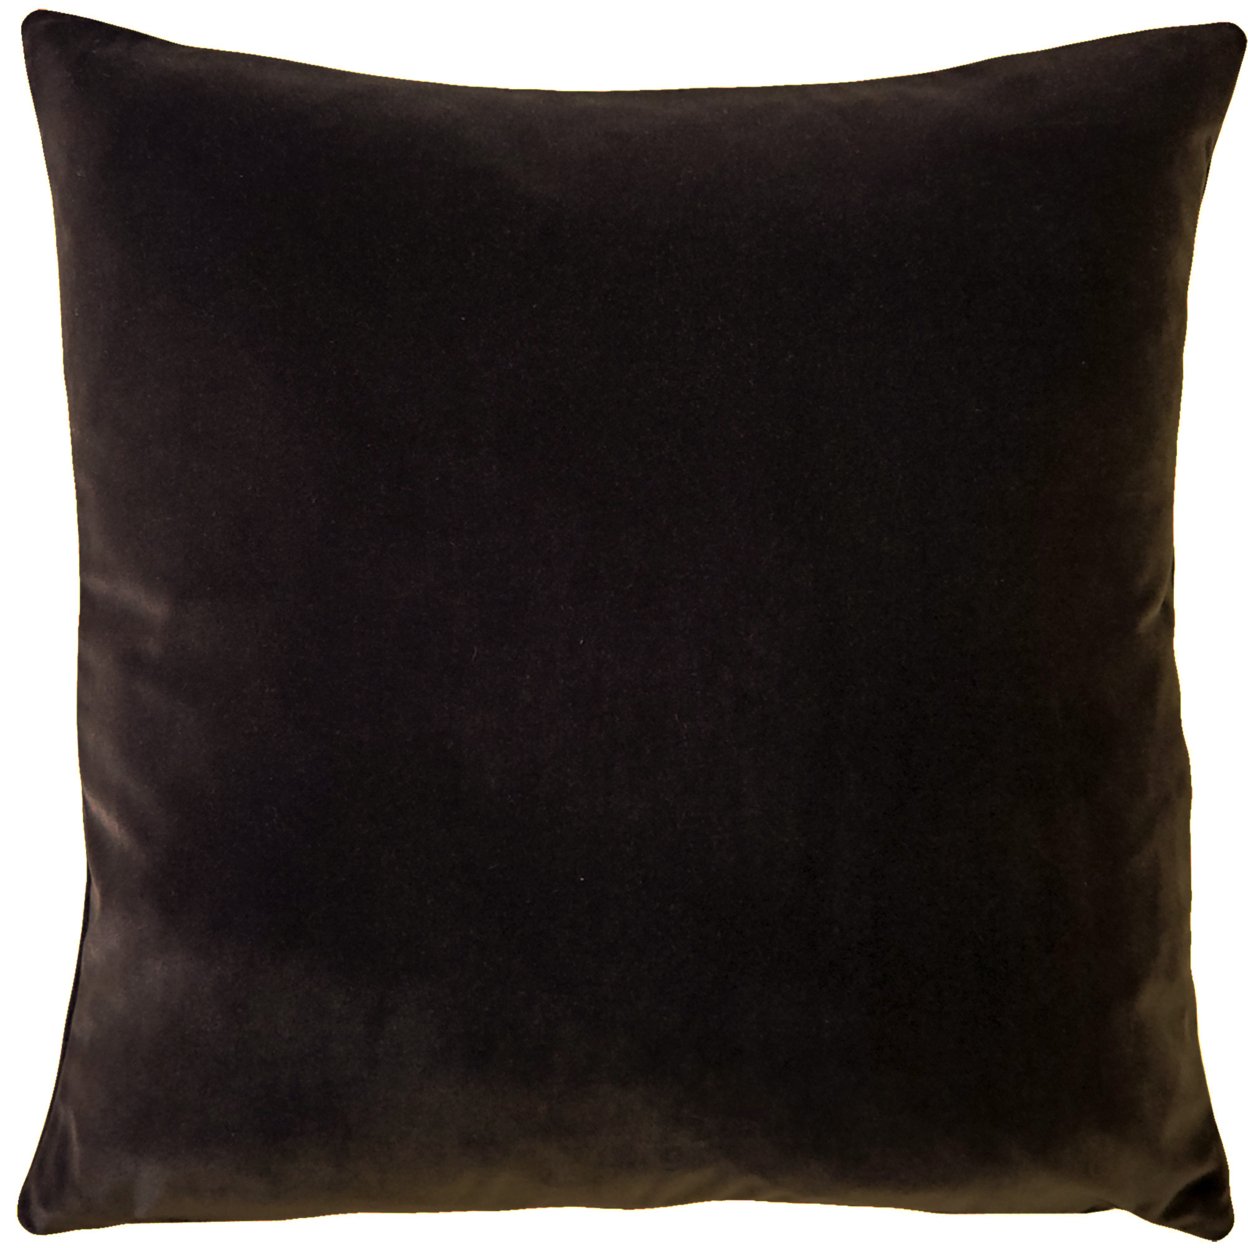 Castello Velvet Throw Pillows, Complete Pillow With Polyfill Pillow Insert (18 Colors, 3 Sizes) - Black, 12x20